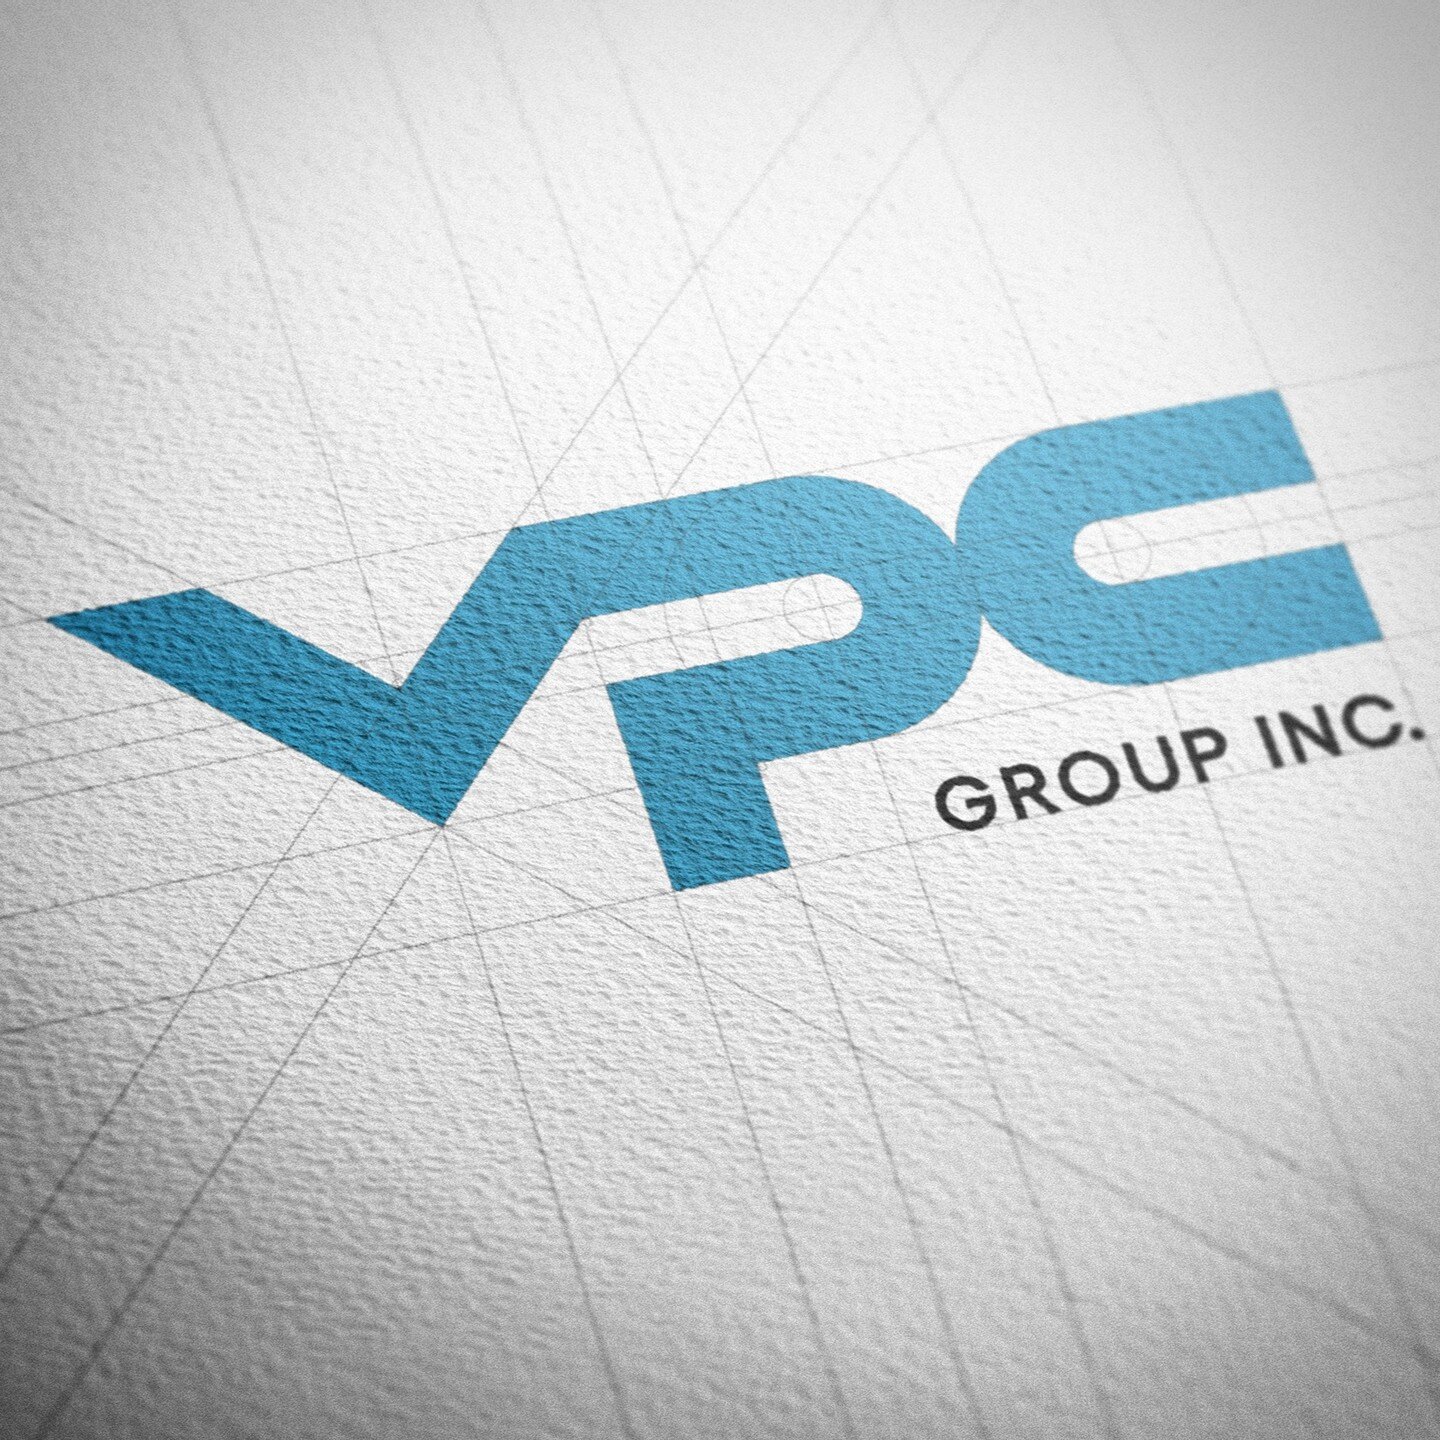 Brand Identity for VPC Group Inc.